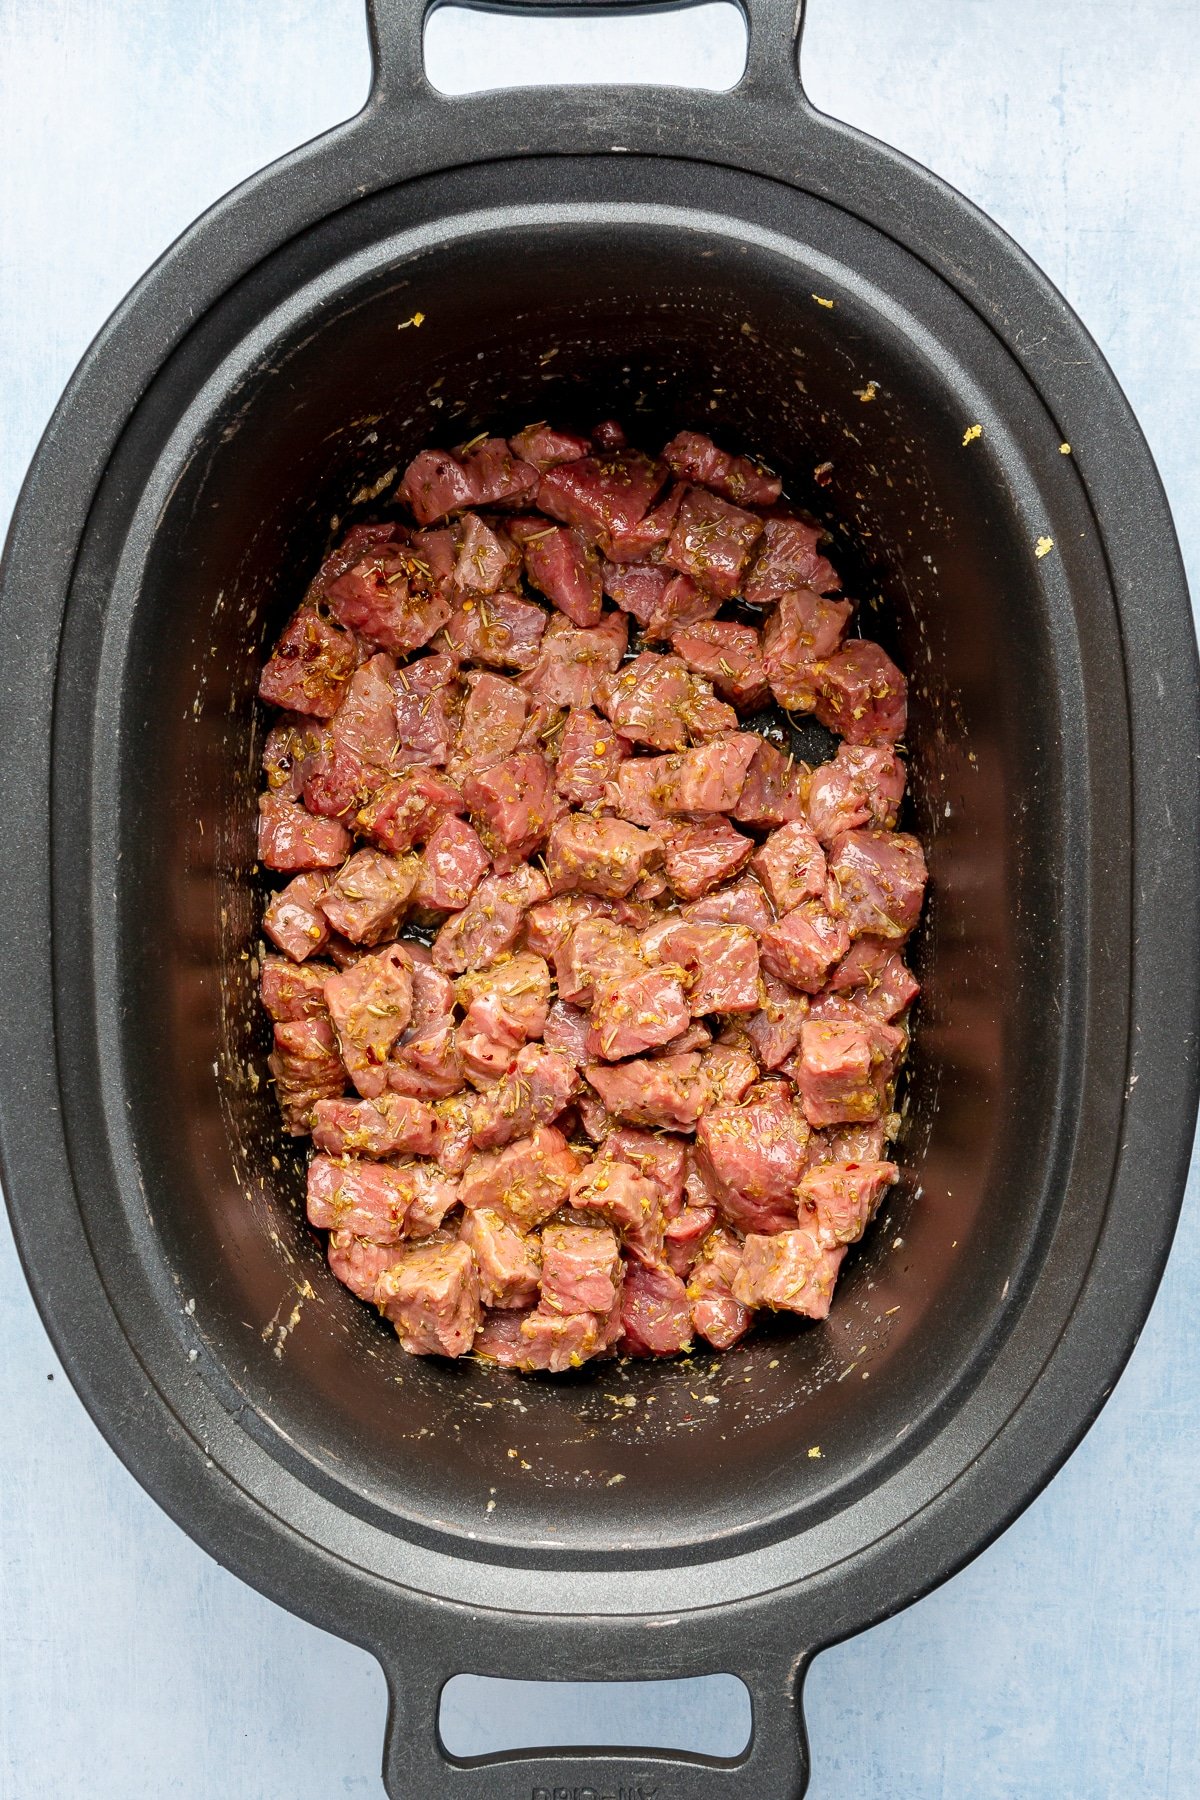 Pieces of beef sit in a slow cooker. They have bene covered in a sauce.